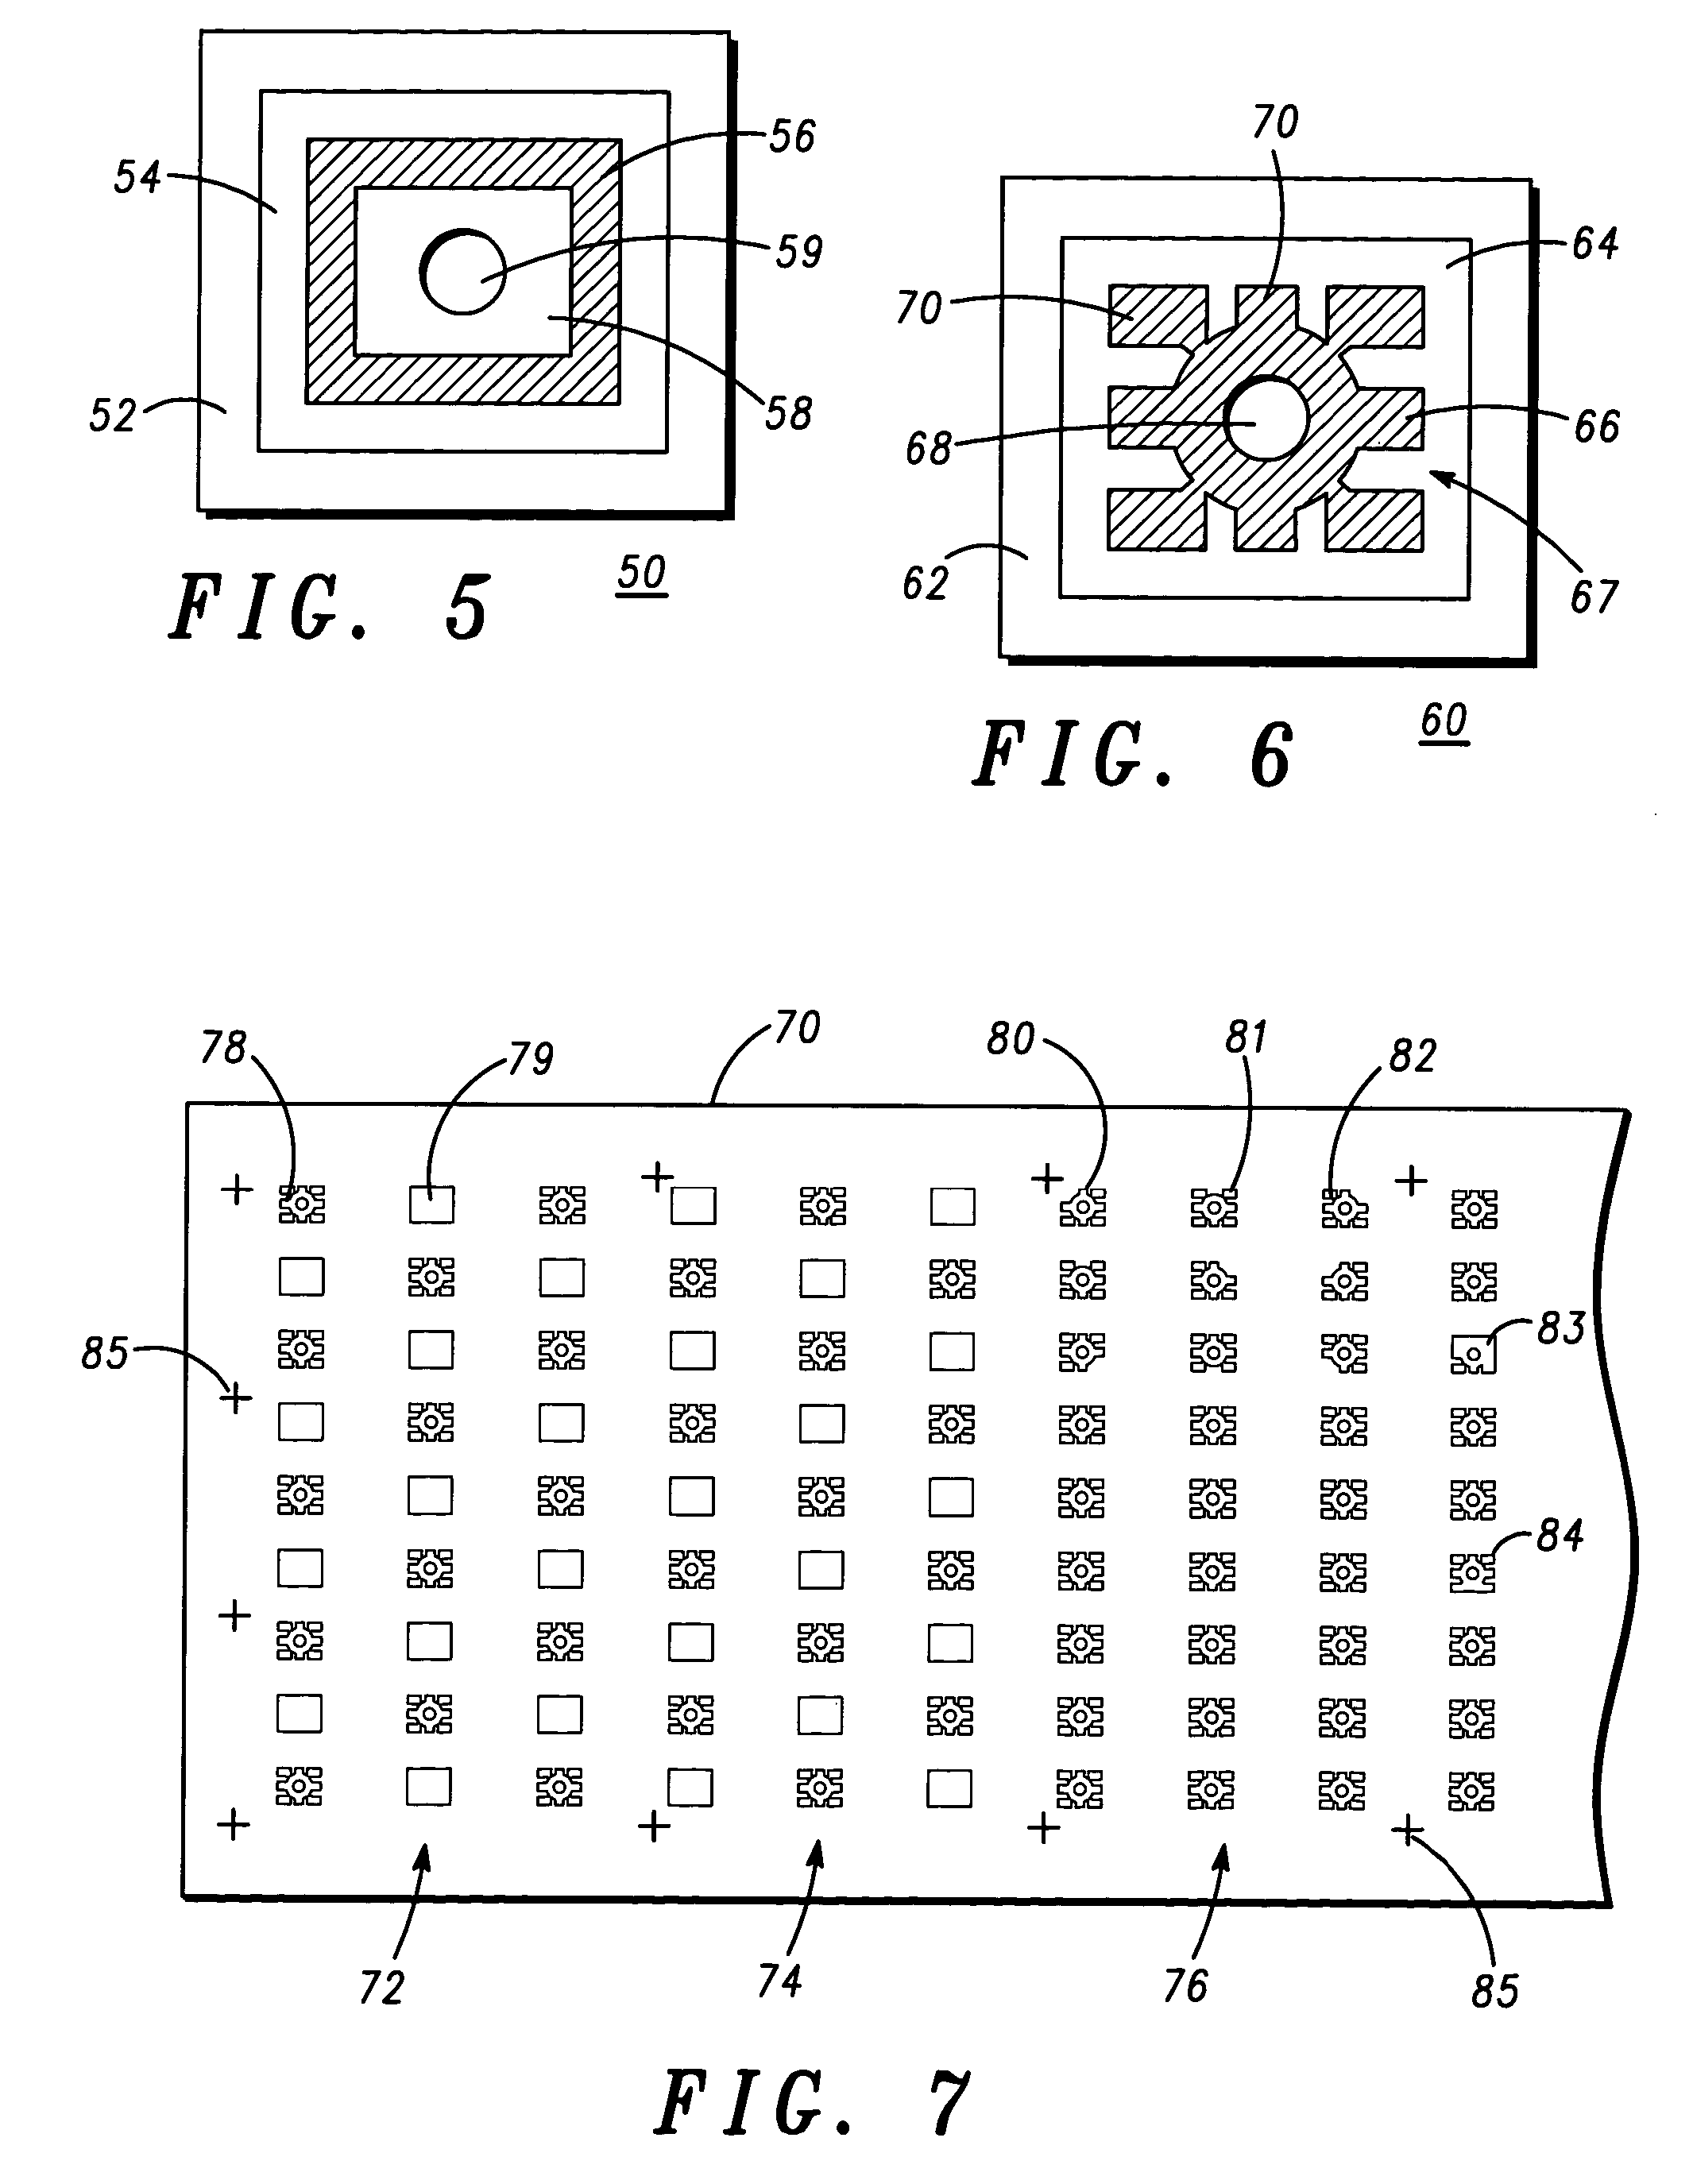 Bonding pad for a packaged integrated circuit